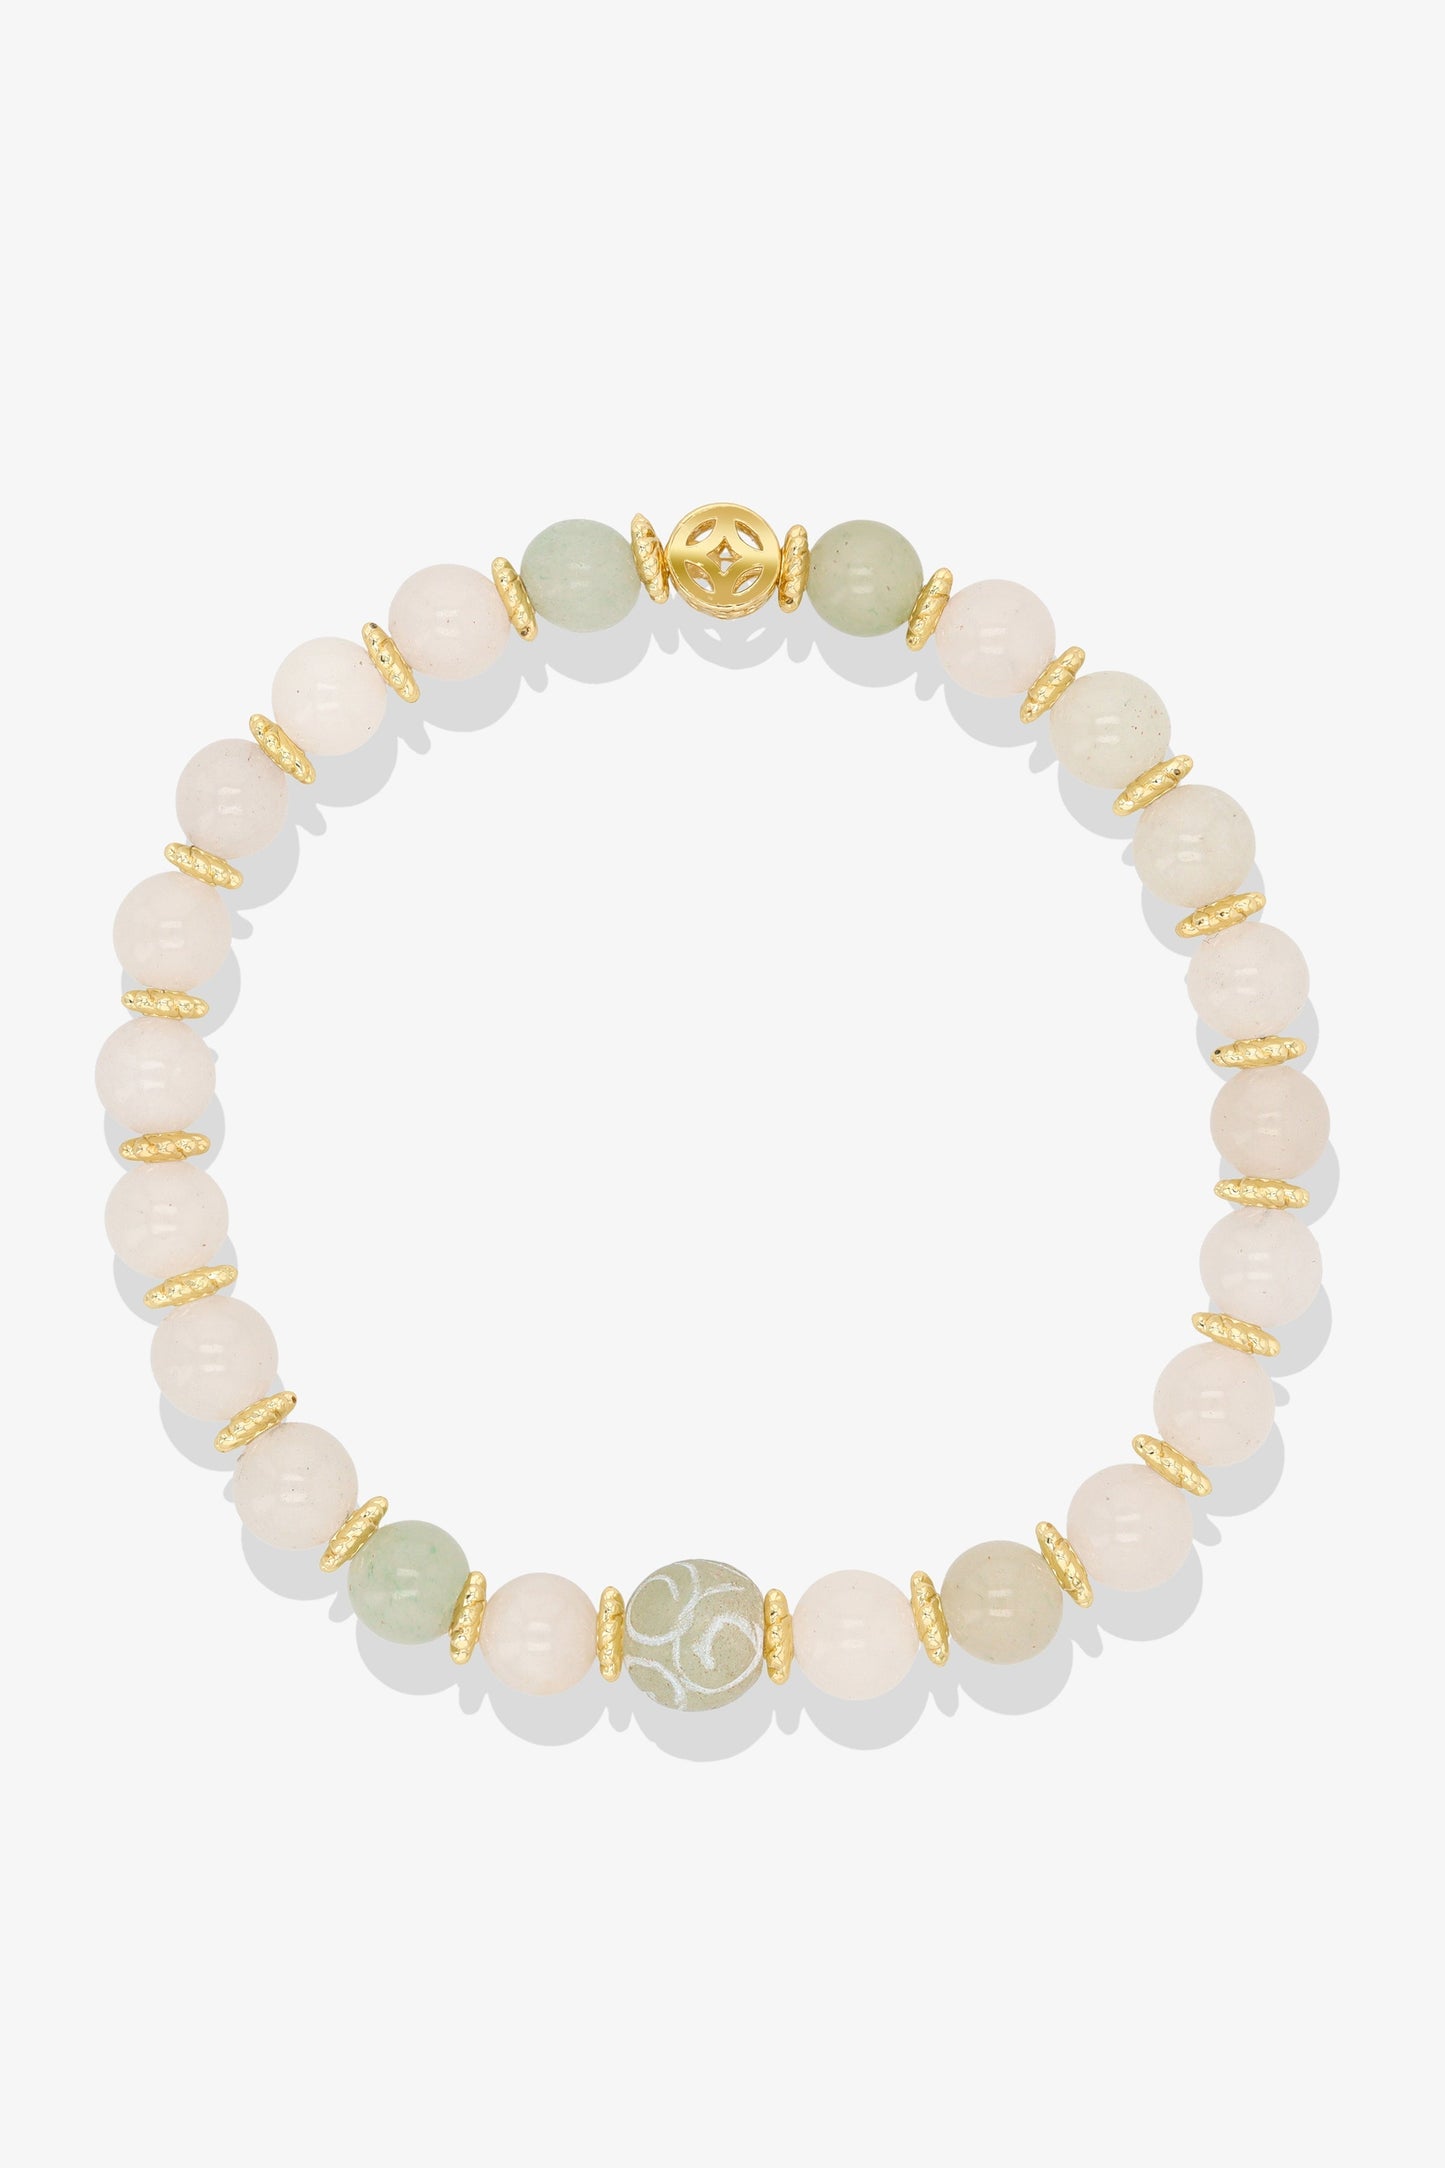 Yellow Calcite with Gold Lucky Coin and White Jade charm Bracelet